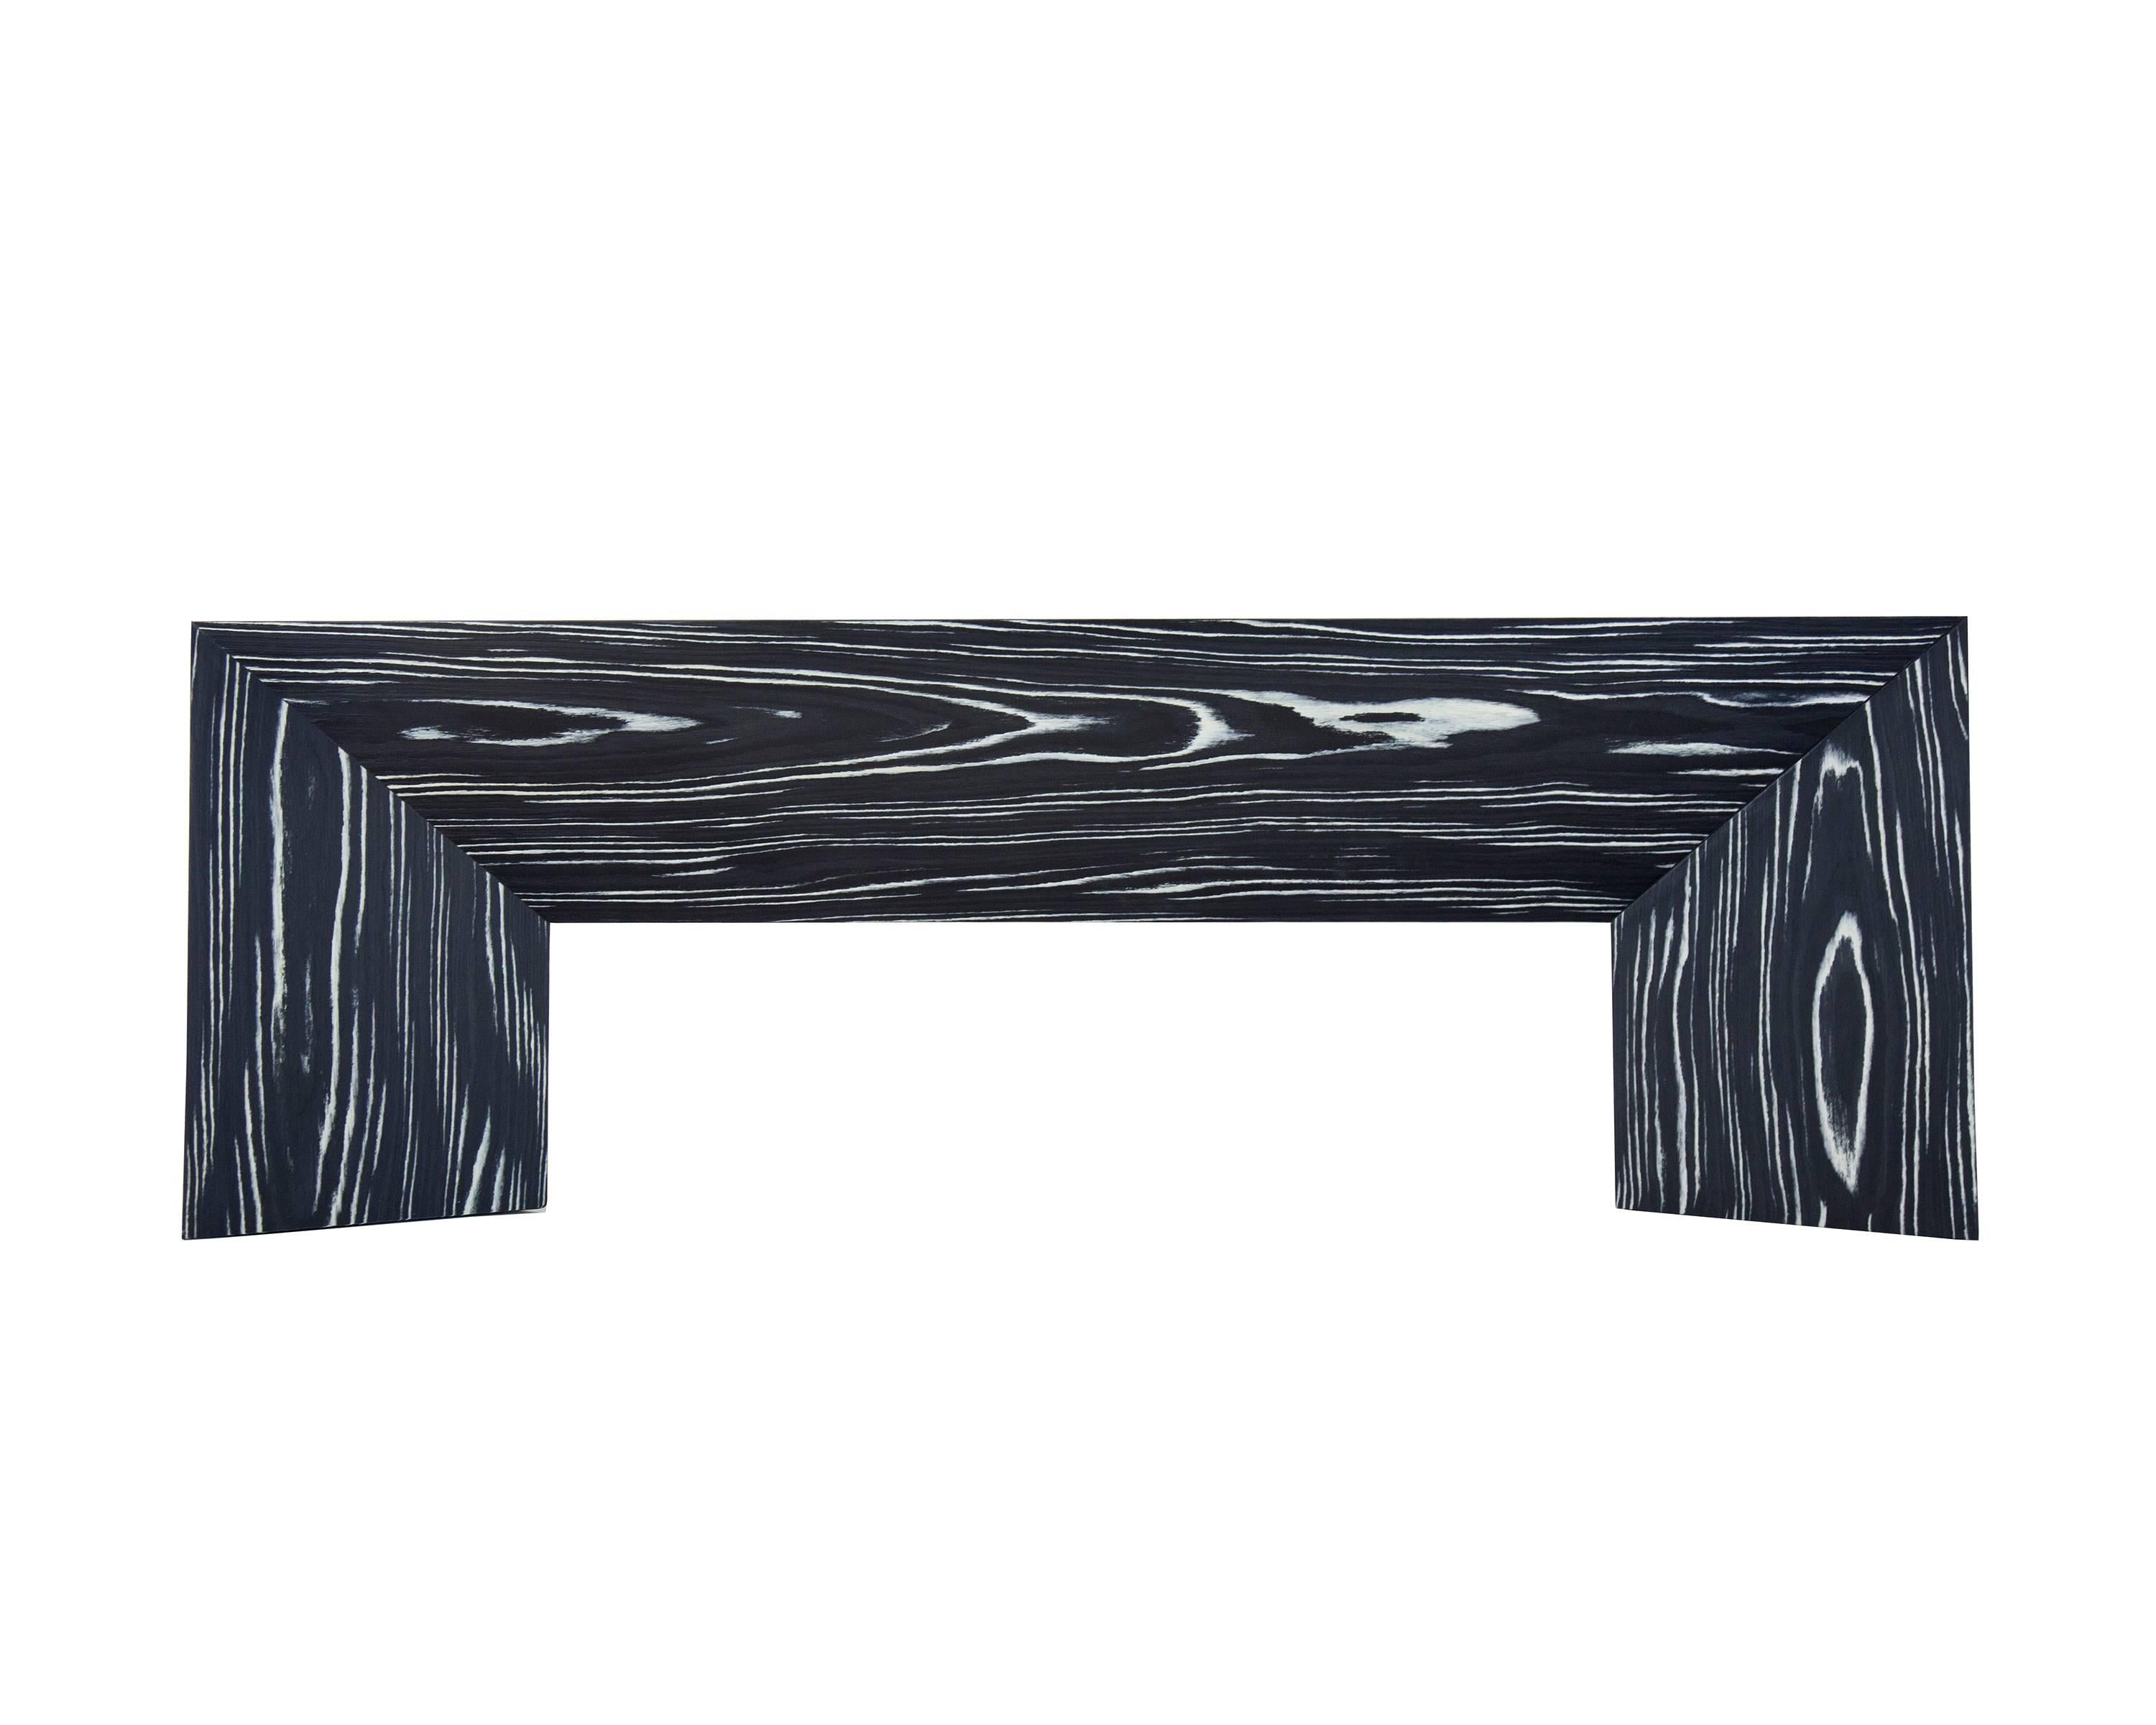 Contemporary Minimal Black and White Ecowood Veneer Fold Bench, USA In New Condition For Sale In Chicago, IL